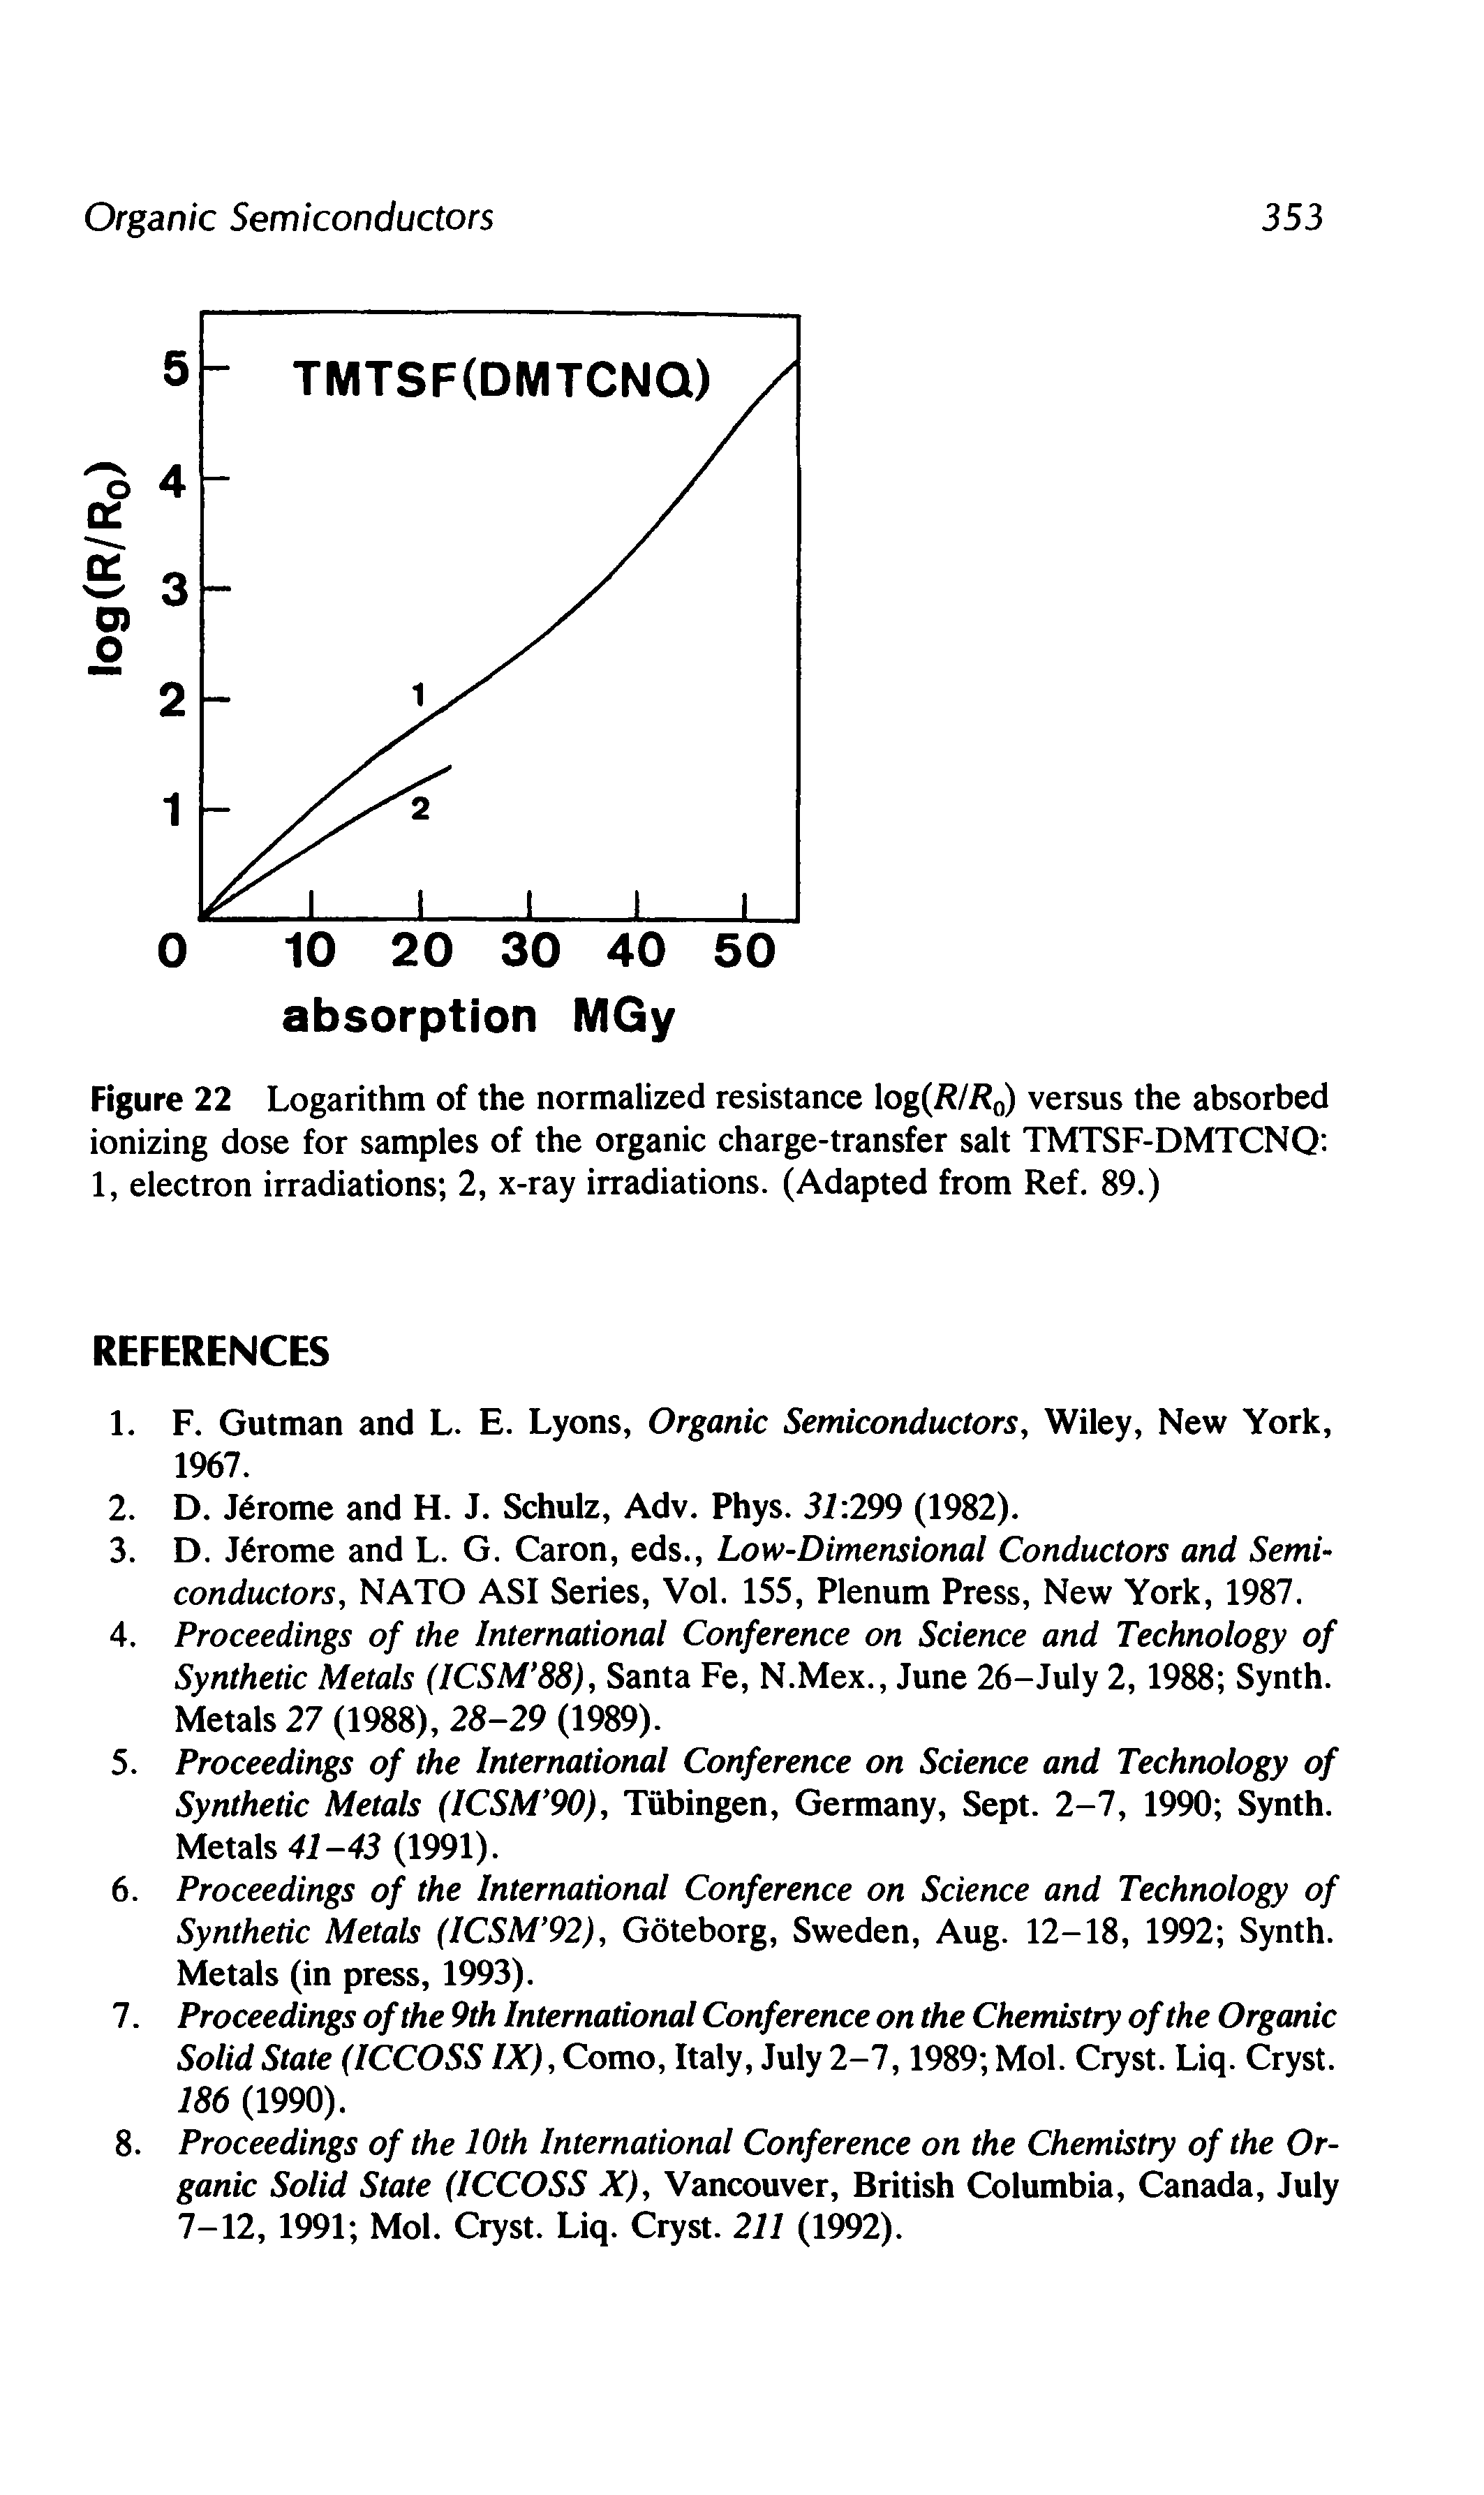 Figure 22 Logarithm of the normalized resistance log(R/R0) versus the absorbed ionizing dose for samples of the organic charge-transfer salt TMTSF-DMTCNQ 1, electron irradiations 2, x-ray irradiations. (Adapted from Ref. 89.)...